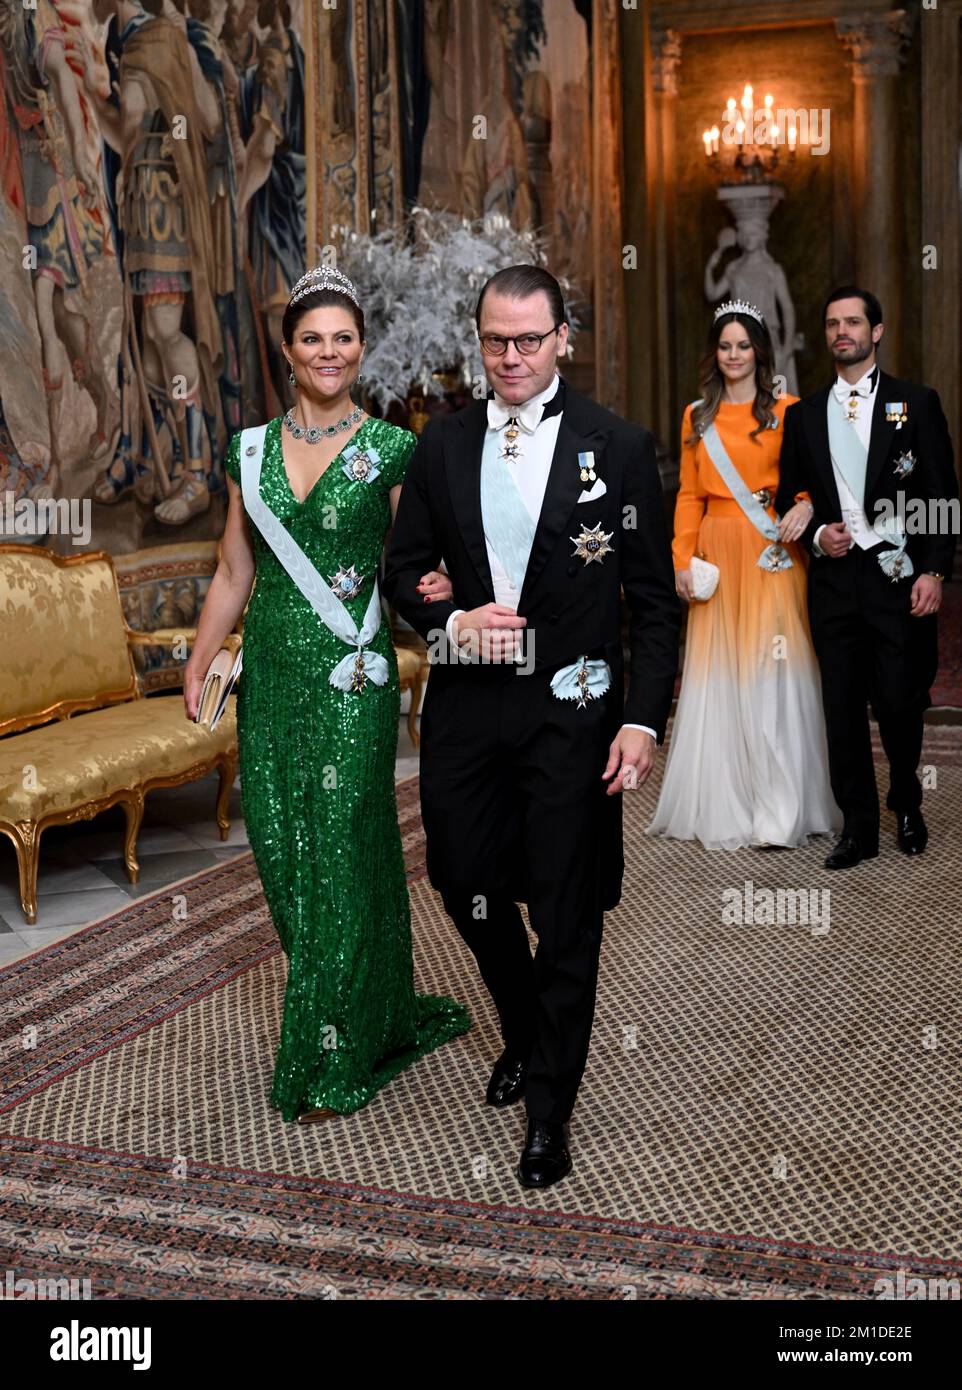 Crown Princess Victoria and Prince Daniel attend the King's dinner for the Nobel laureates at the Royal Palace in Stockholm, Sweden, 11 December 2022. Photo: Pontus Lundahl / TT / 10050 Stock Photo